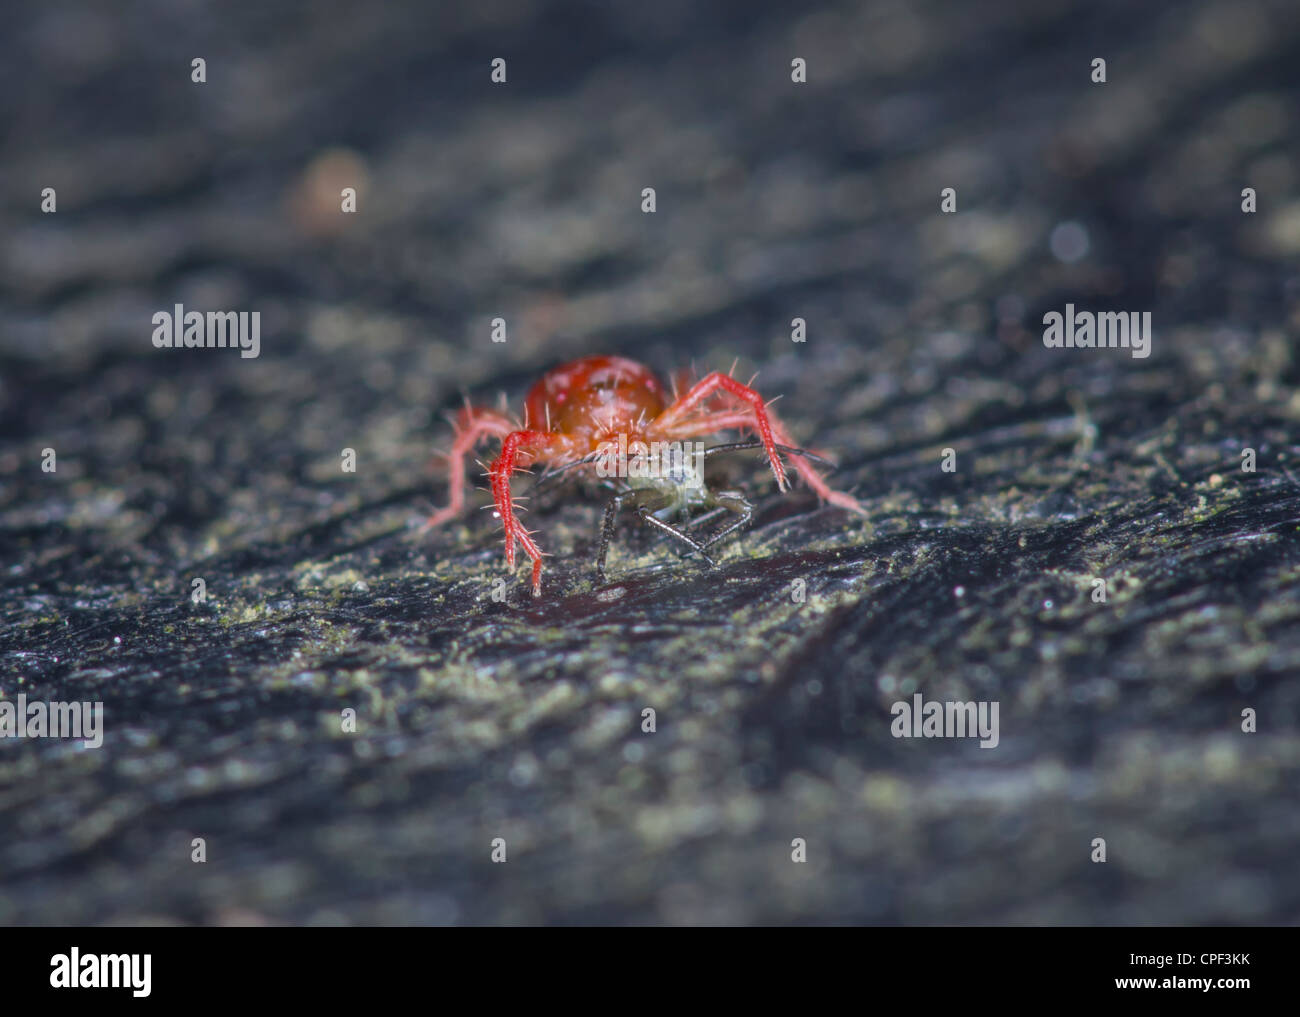 Red Spider Mite eating pray Stock Photo